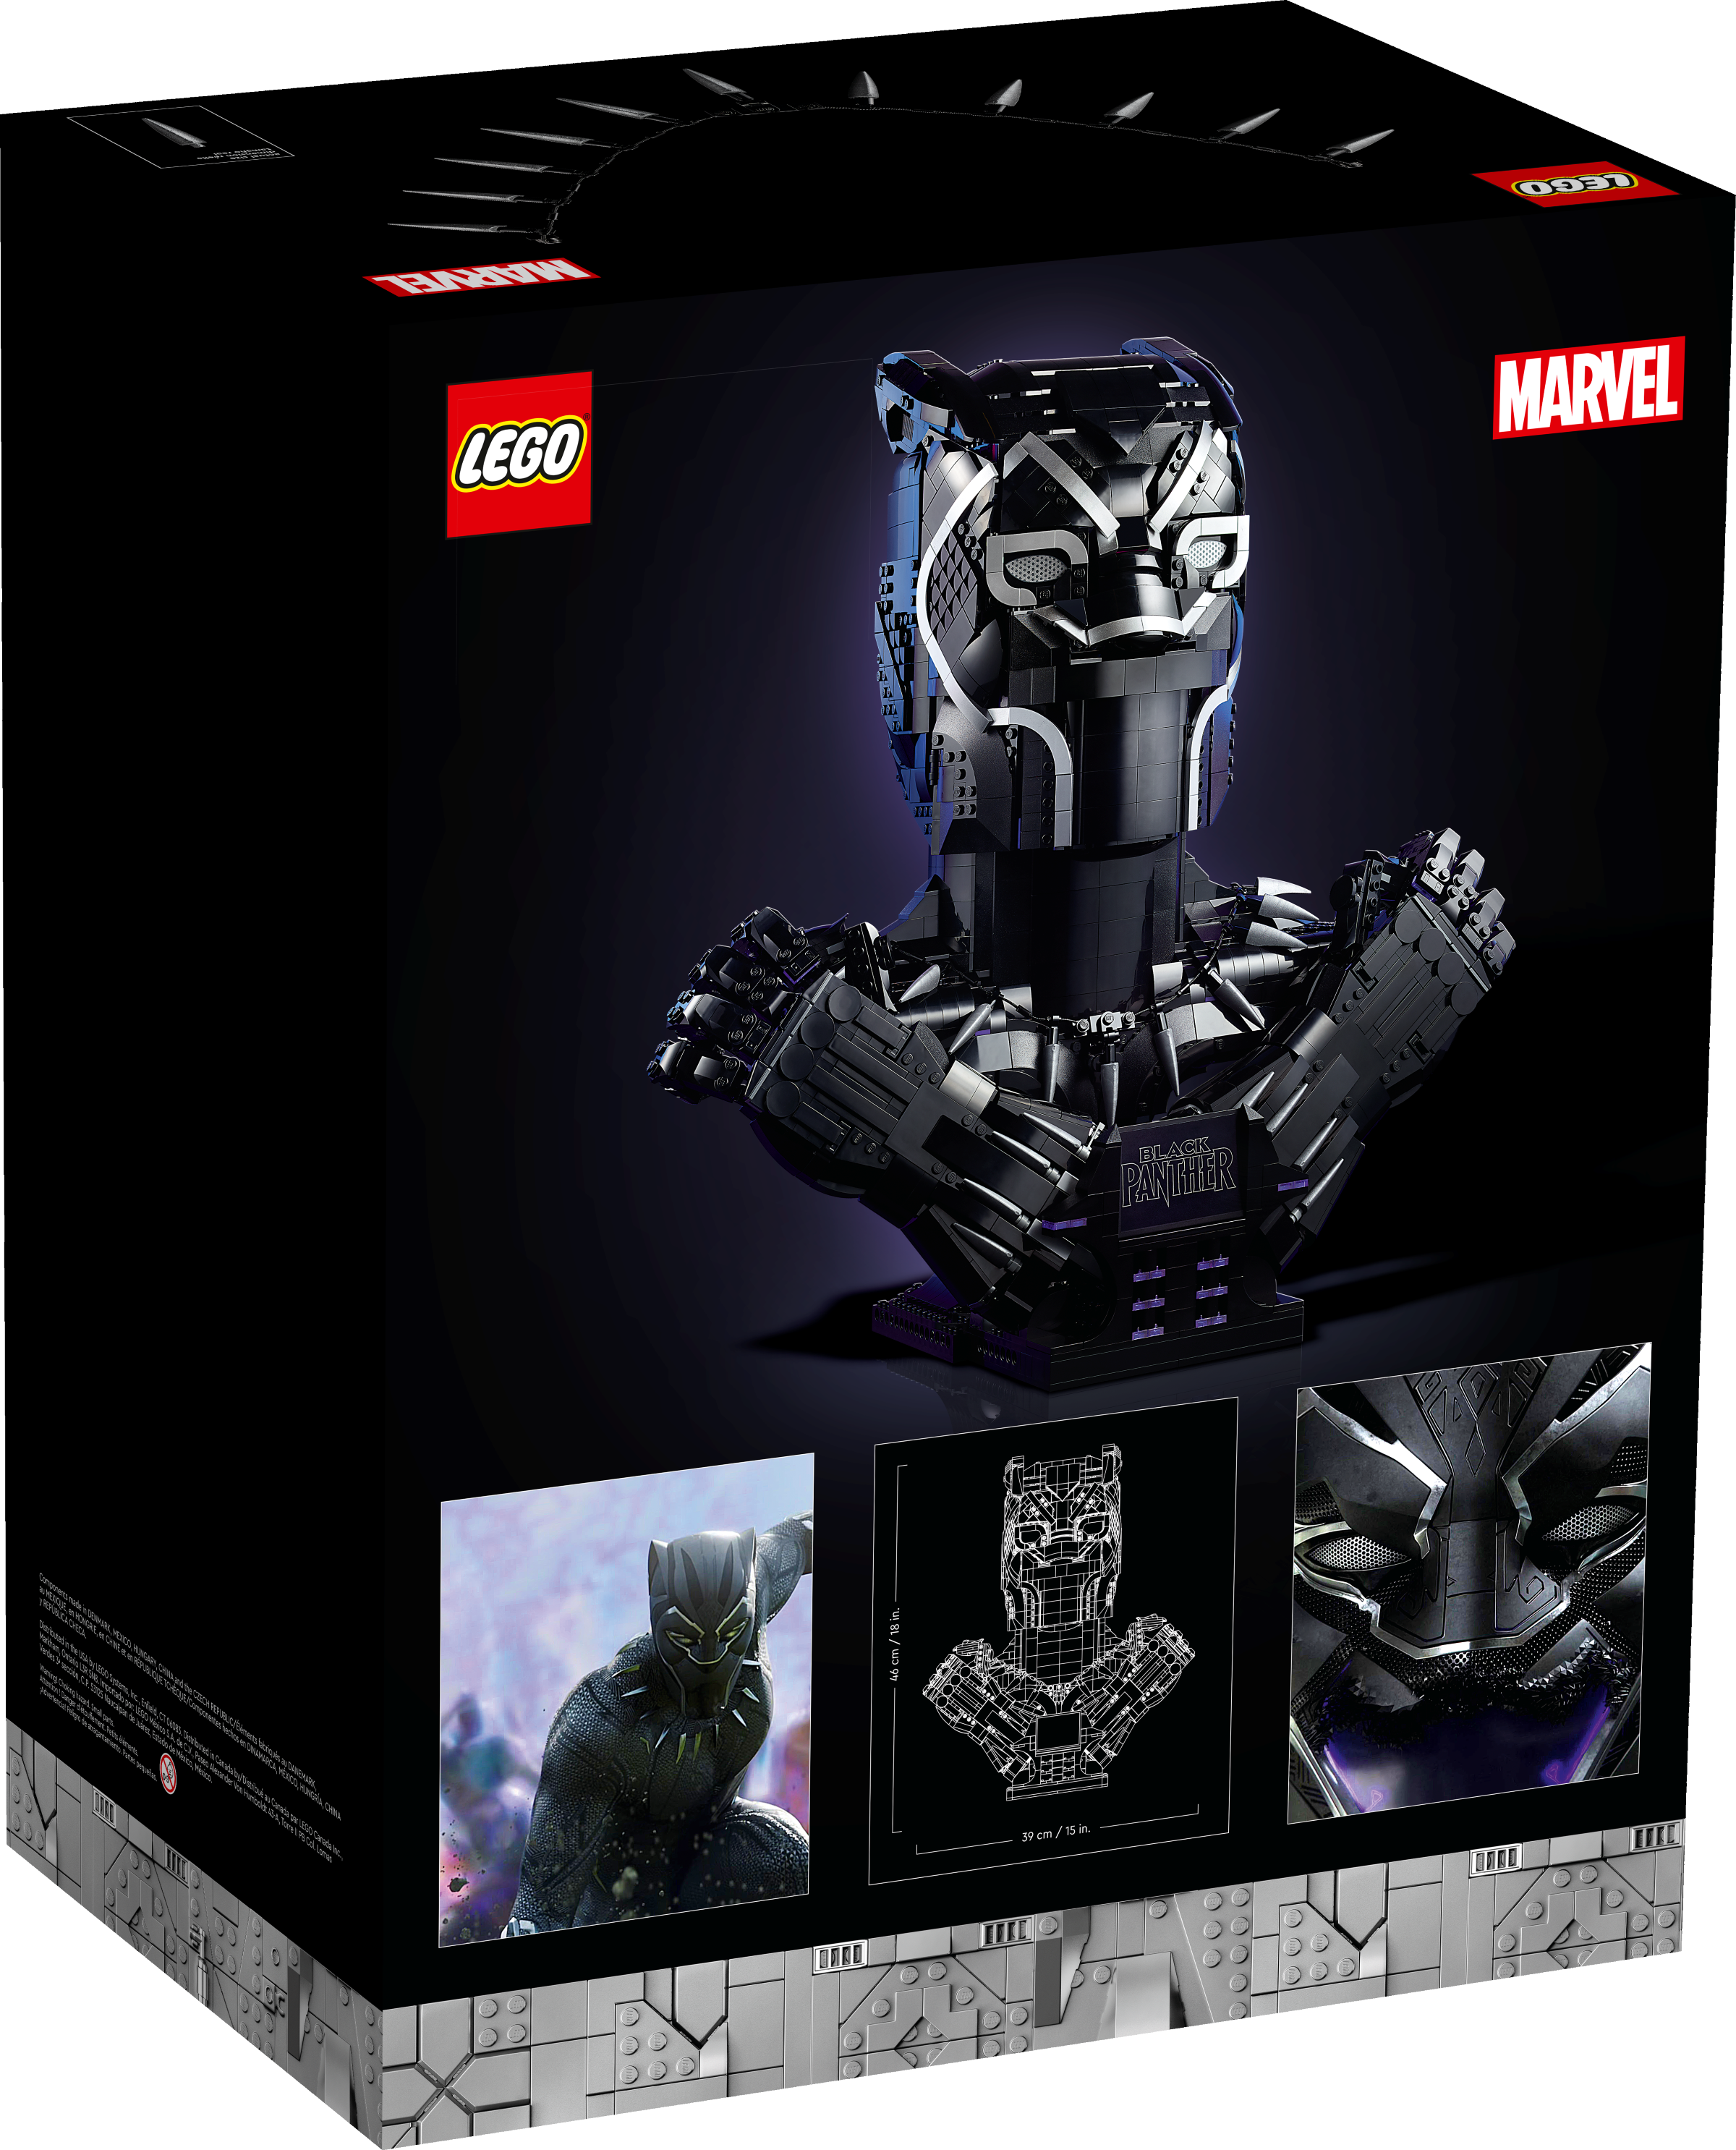 The 350$ LEGO Black Panther Review 